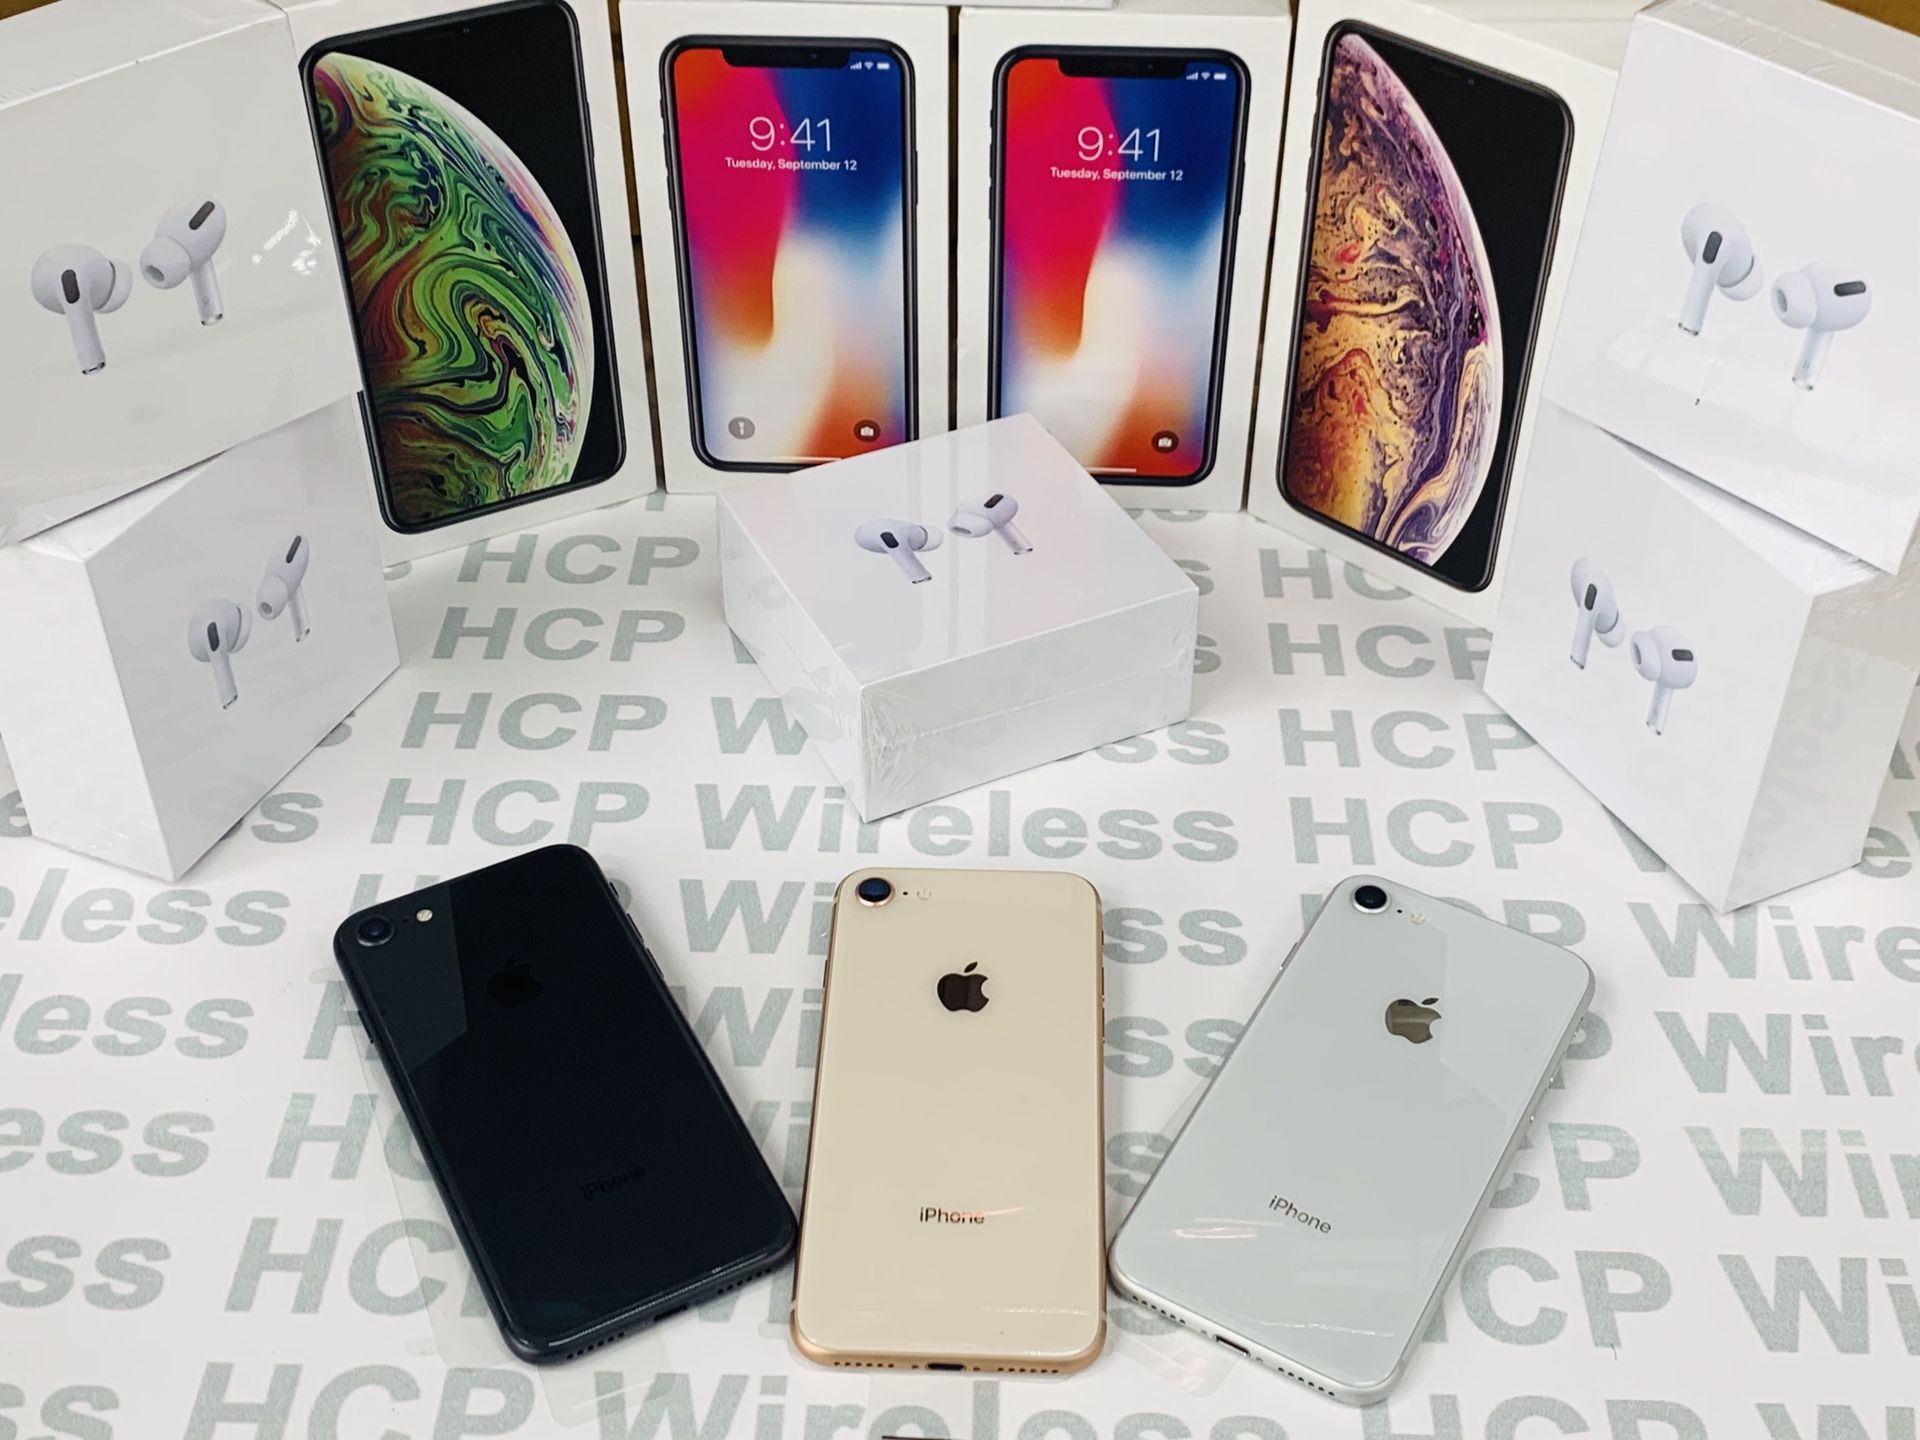 🚨iPhone 8 64gb Unlocked (Desbloqueado) We are a Store! We give warranty!🚨